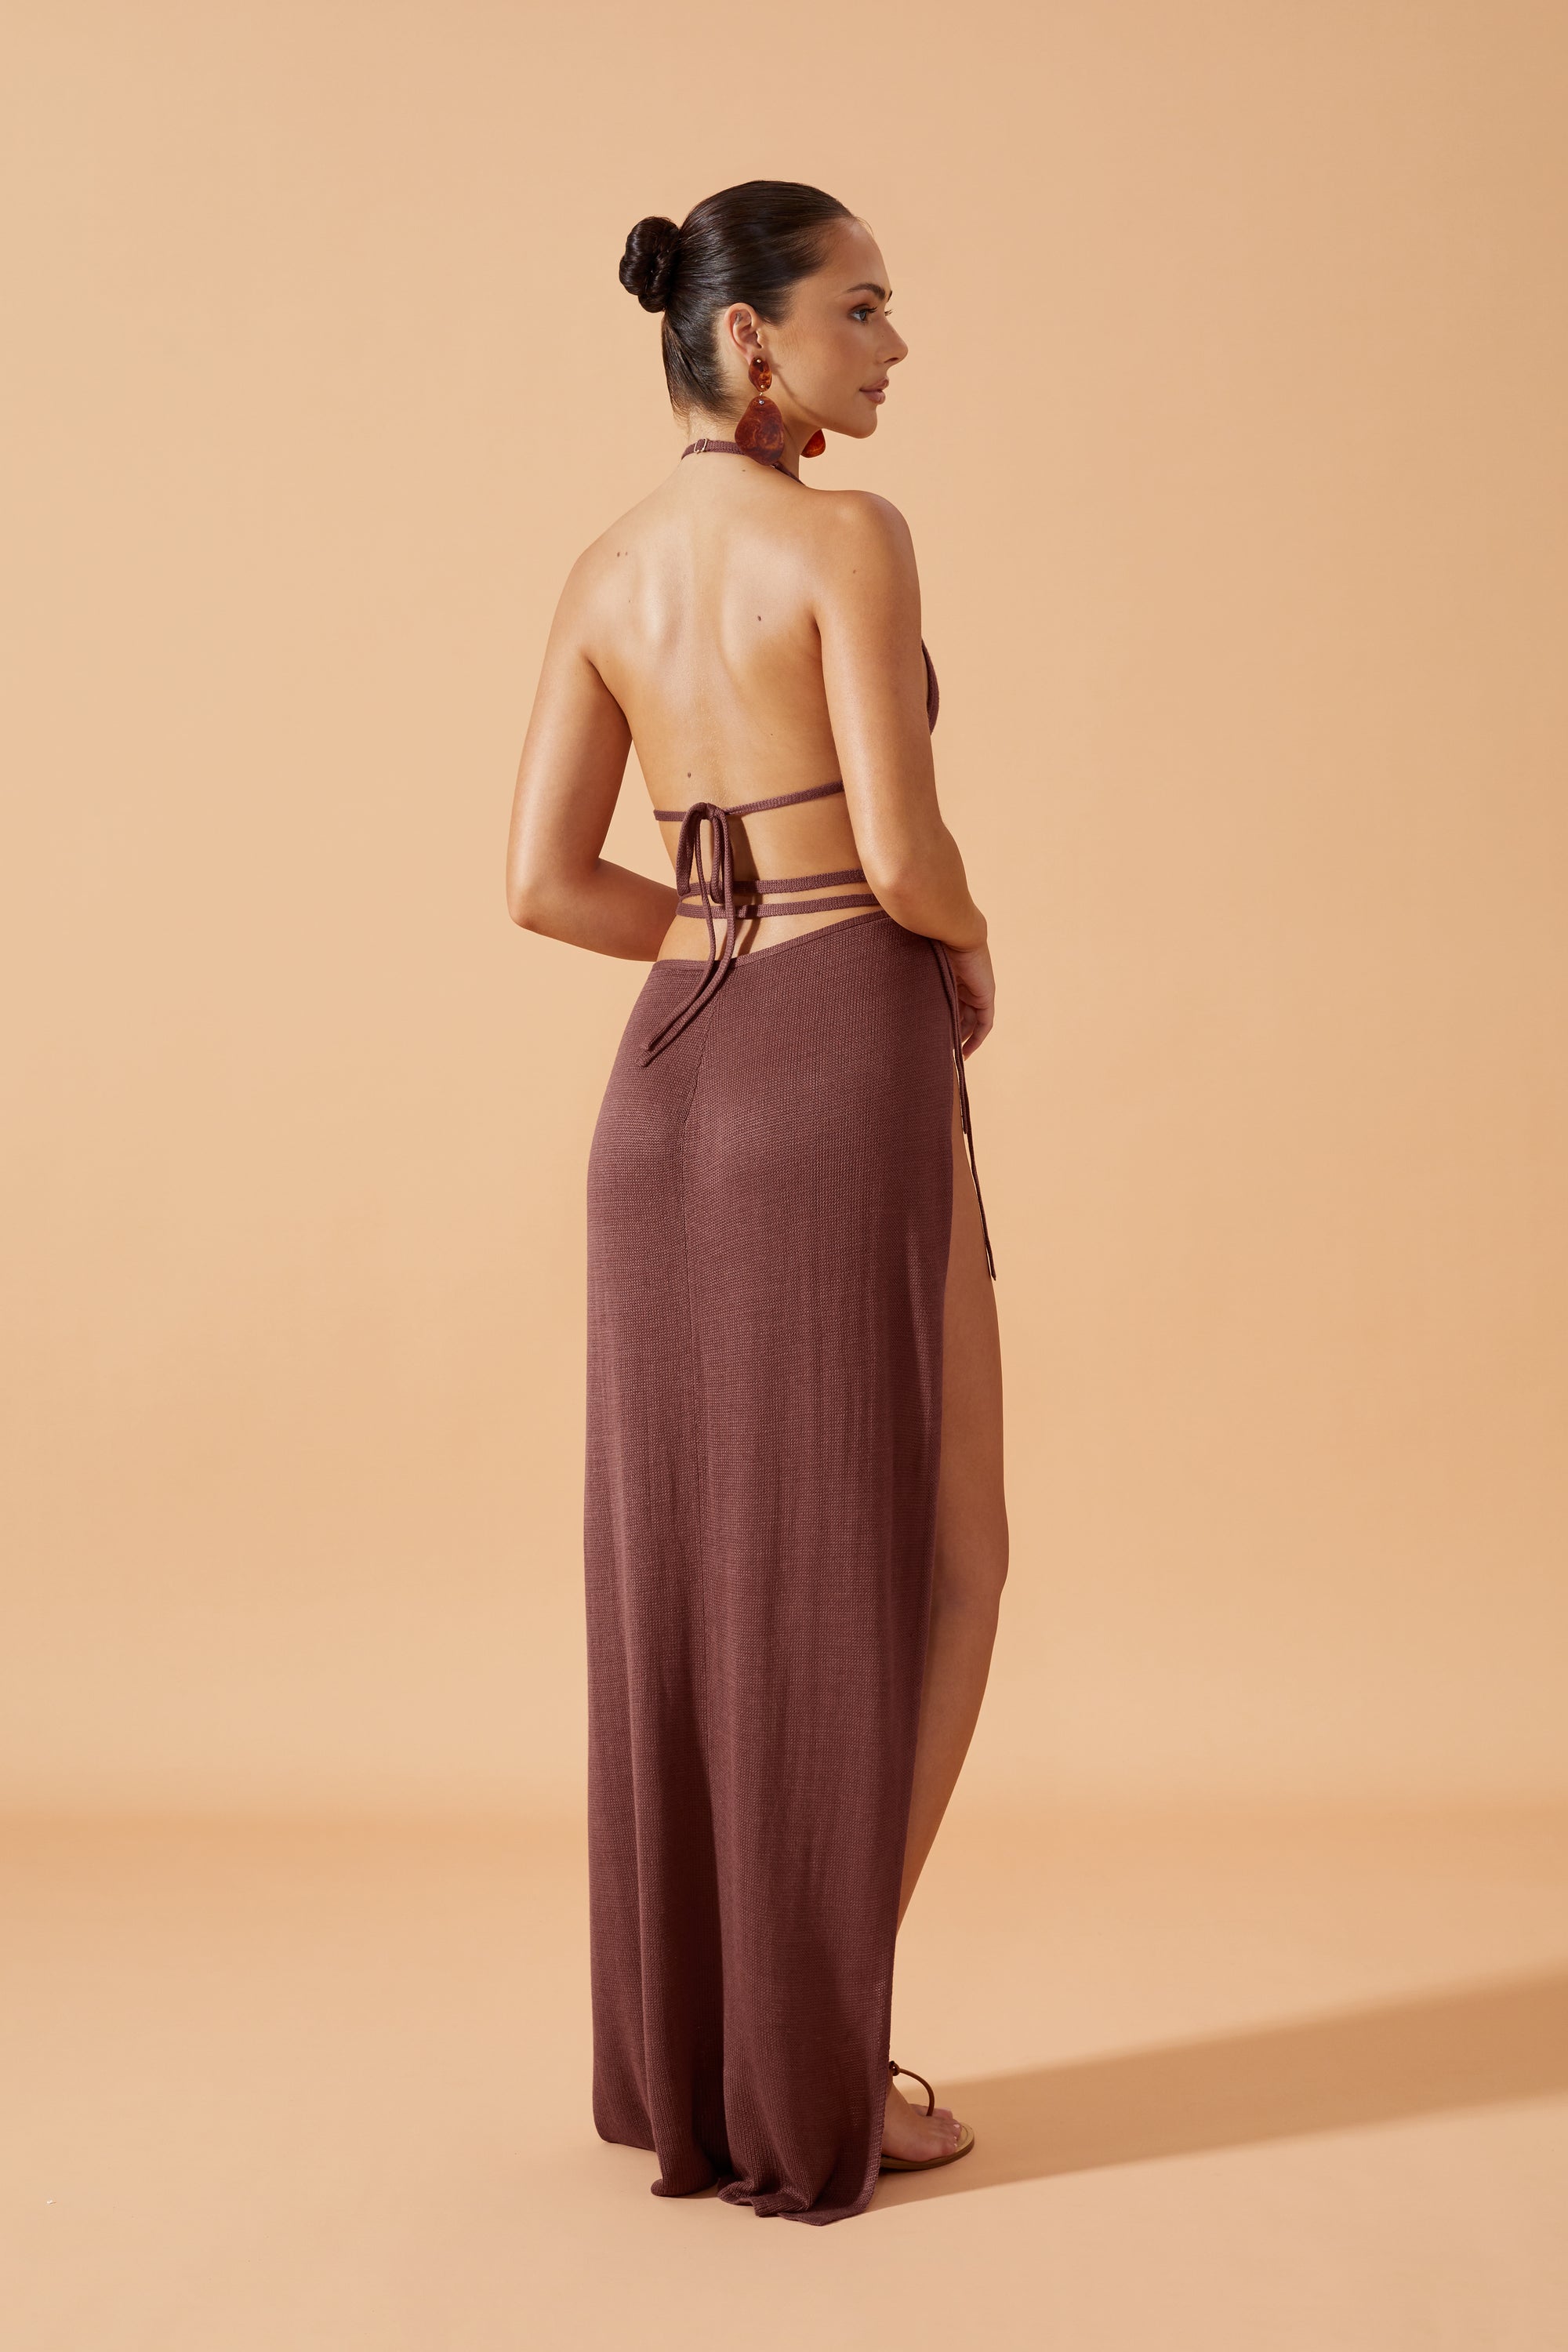 Flook The Label Zula Knitted Triangle Top in Coconut husk. Matched with Zula Knitted Maxi Wrap Skirt. Back View